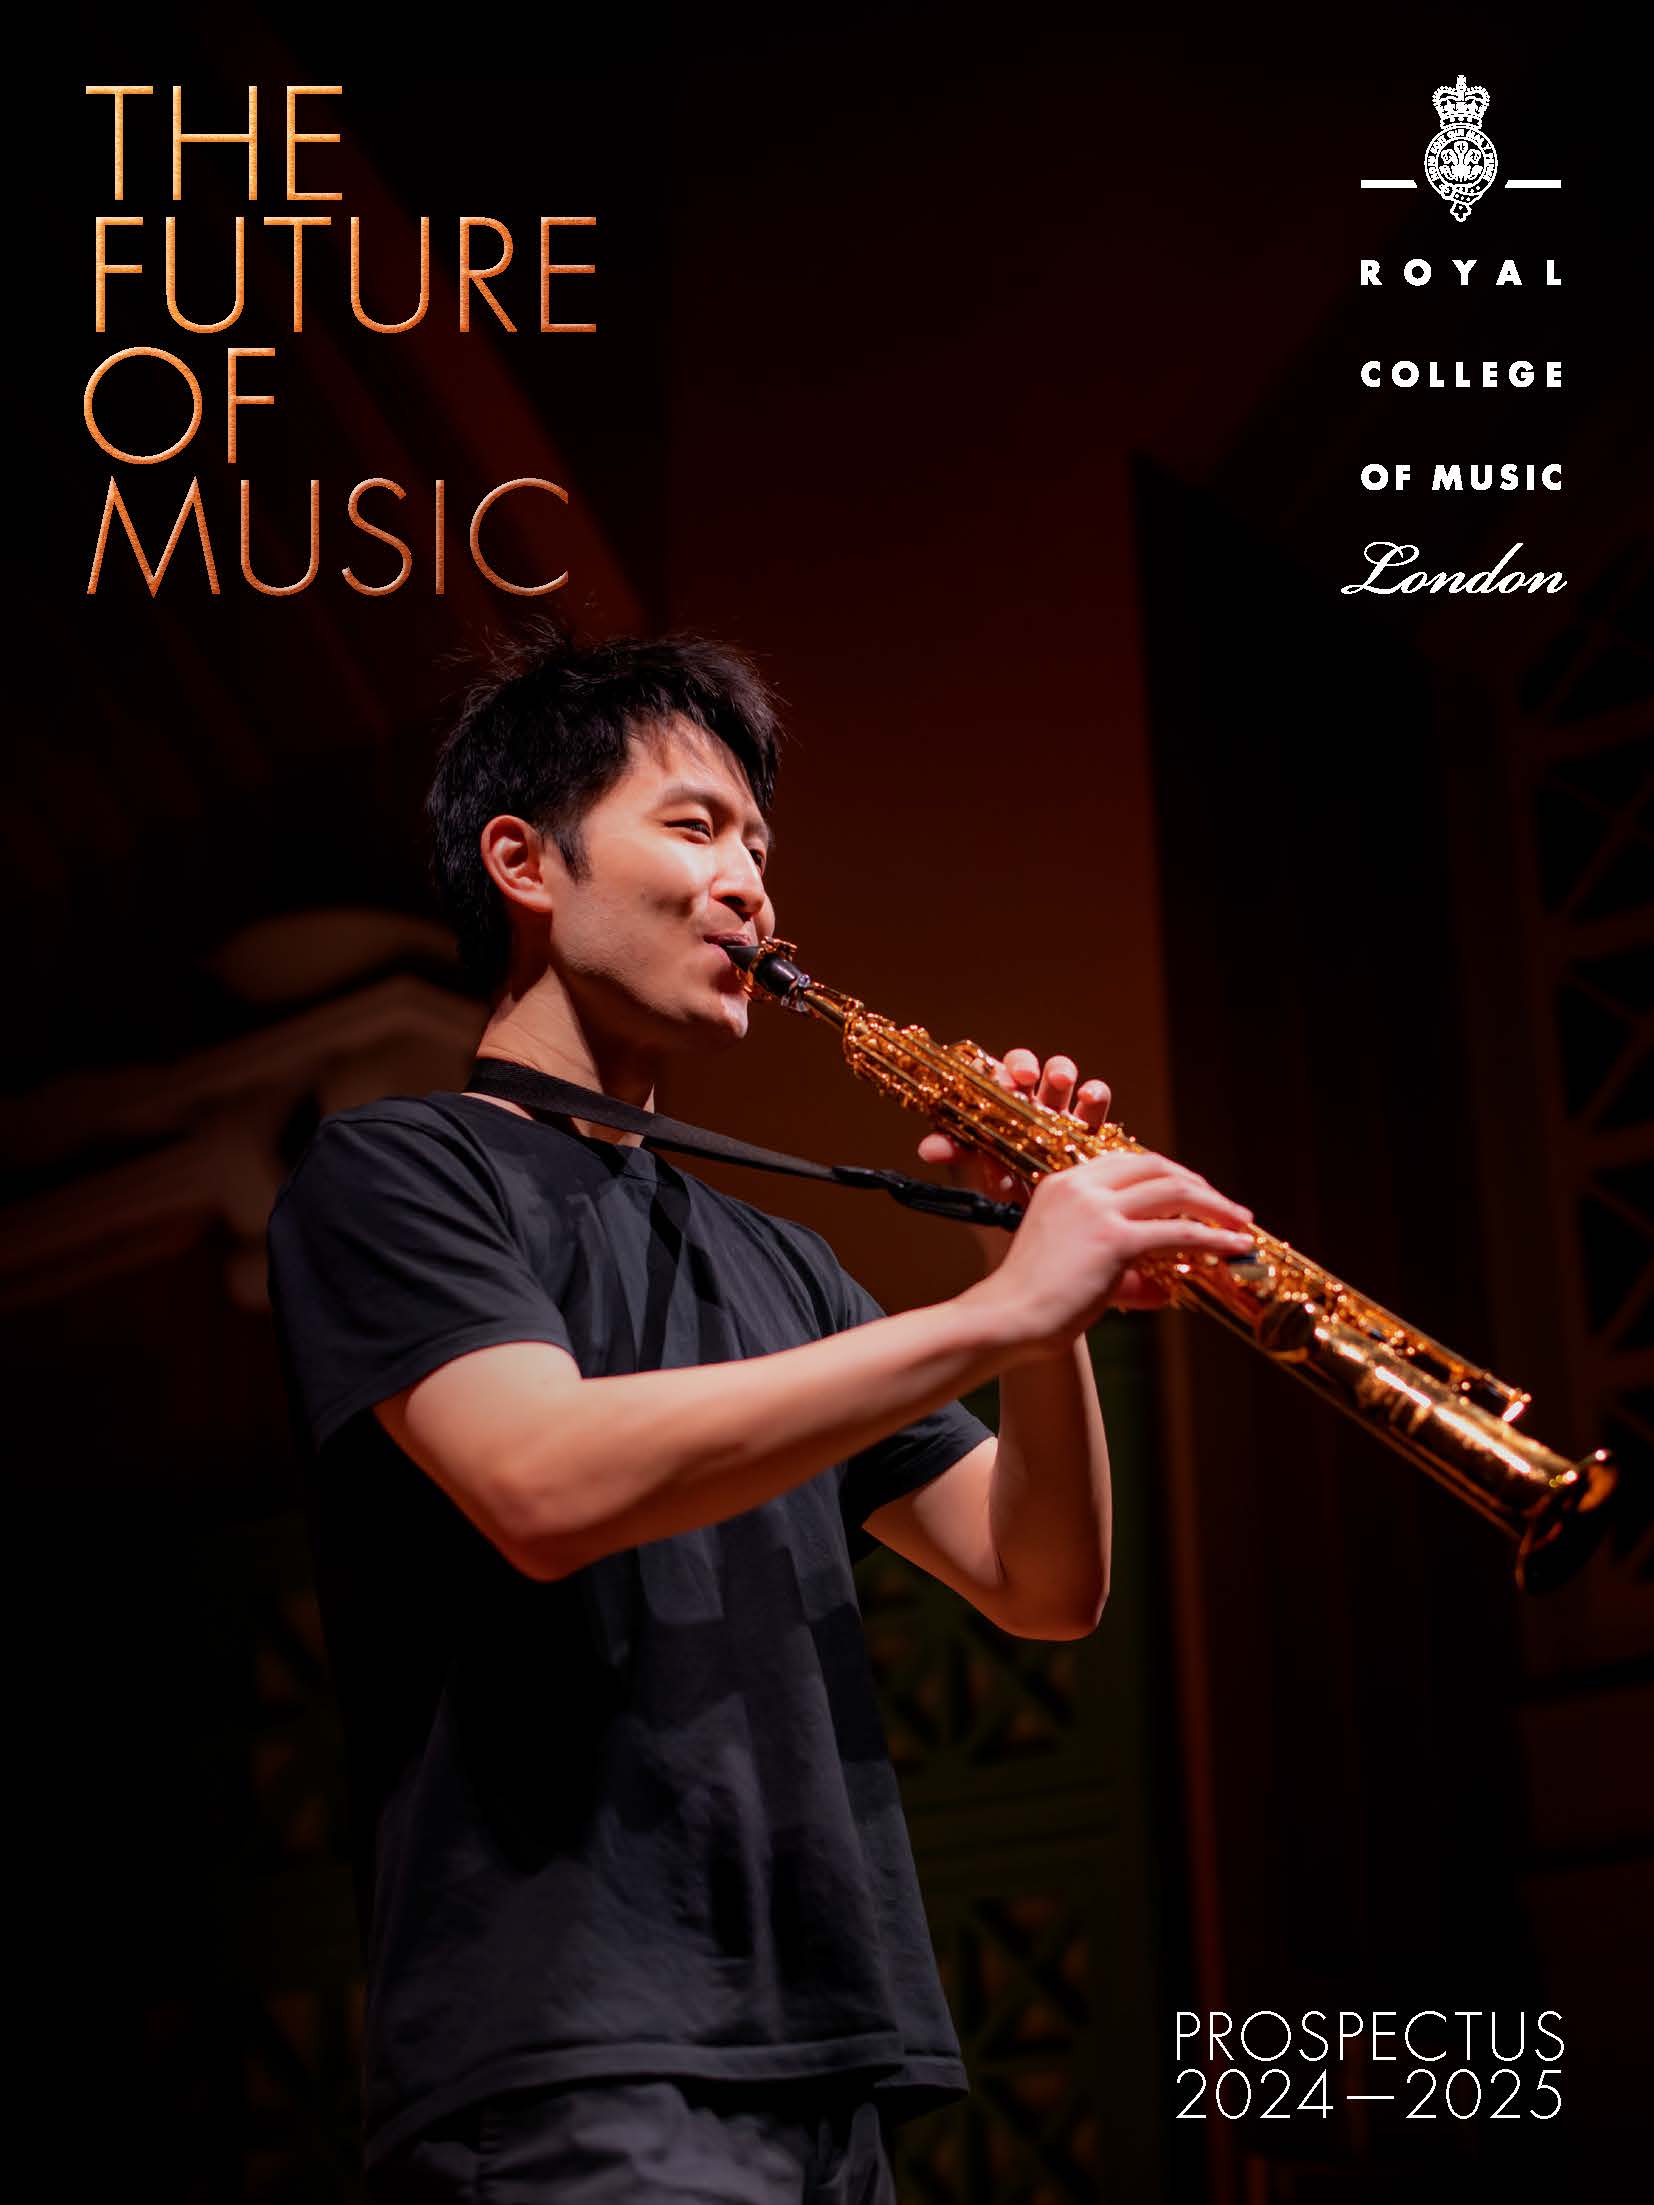 The front cover of the Prospectus 24-25 of a male Asian student playing the telesaxophone, surrounded with by a dimly lit background.